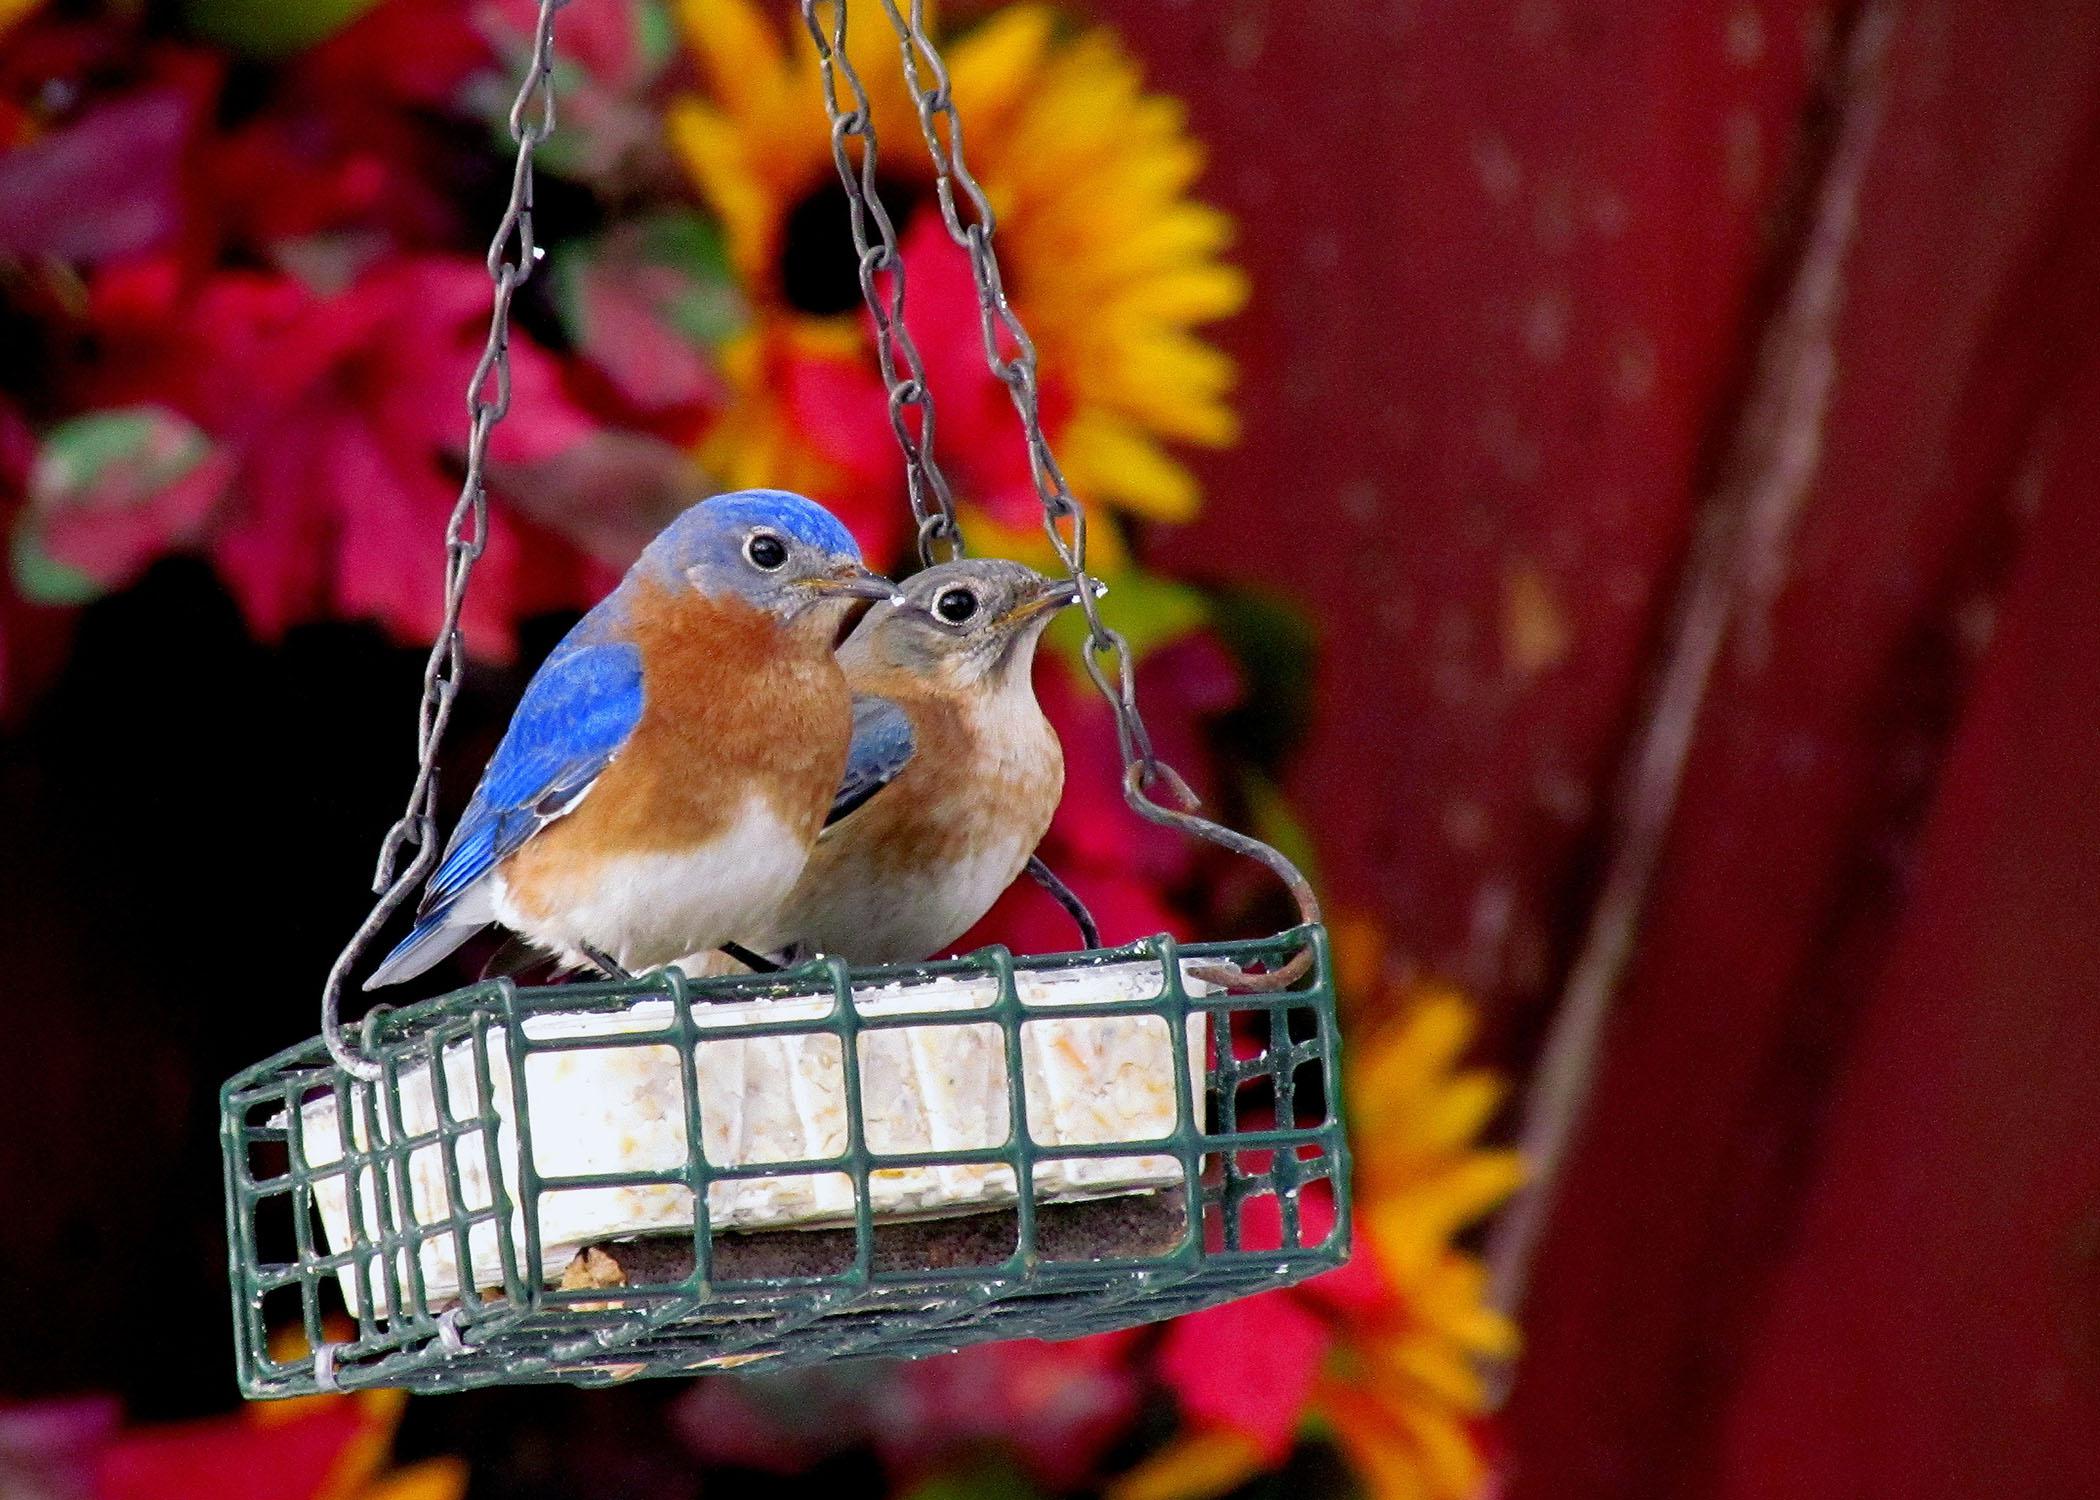 Eastern bluebirds will benefit from suet, a high-fat, high-calorie treat, in the winter months. (Photo by Jeanne Creech)